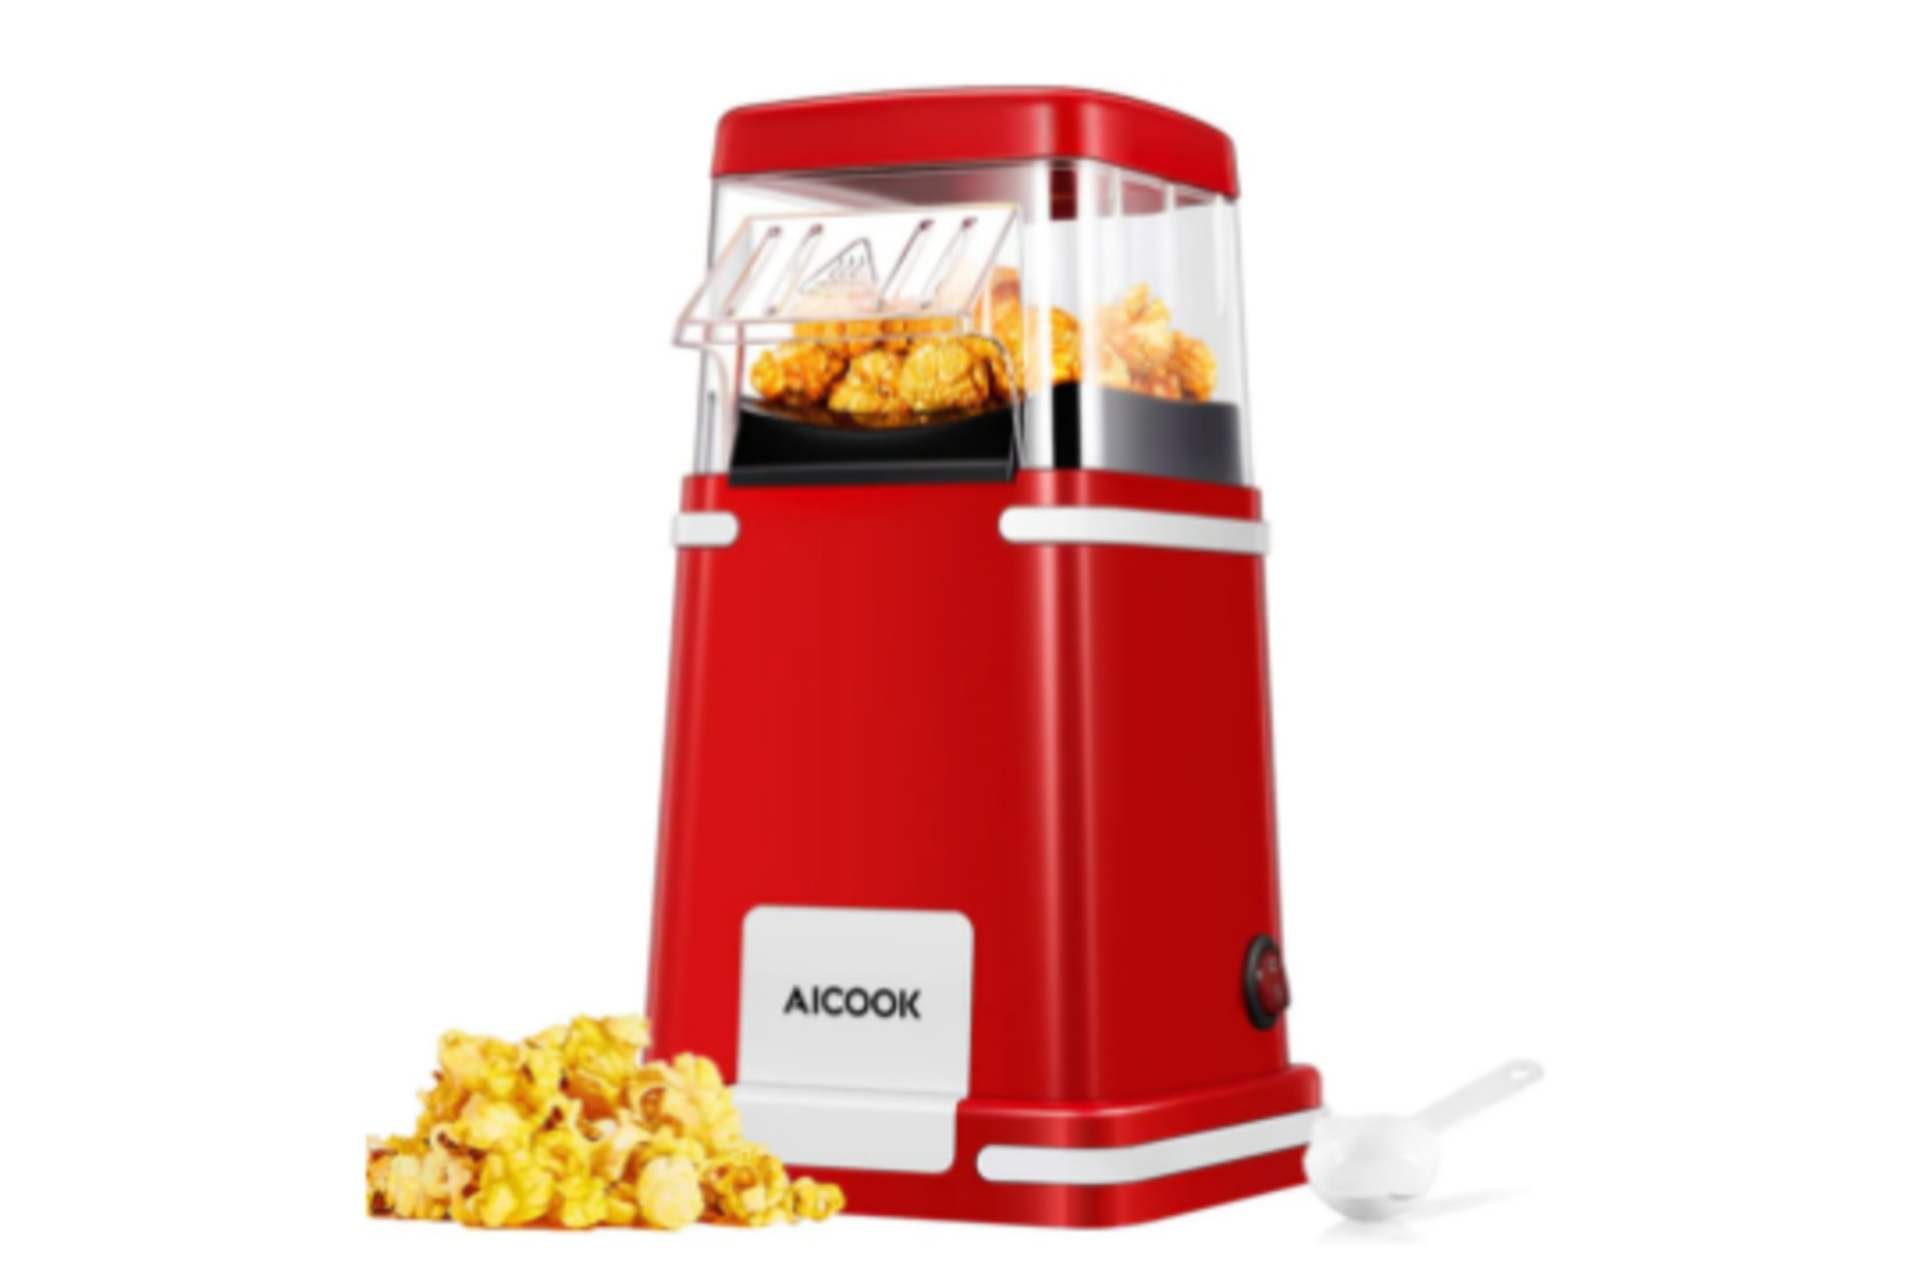 NEW BOXED AICOOK Nostalgic Hot Air Popcorn Maker. (GPM-860-ROW4) ?HOT AIR SYSTEM&HIGH EFFICIENCY ?